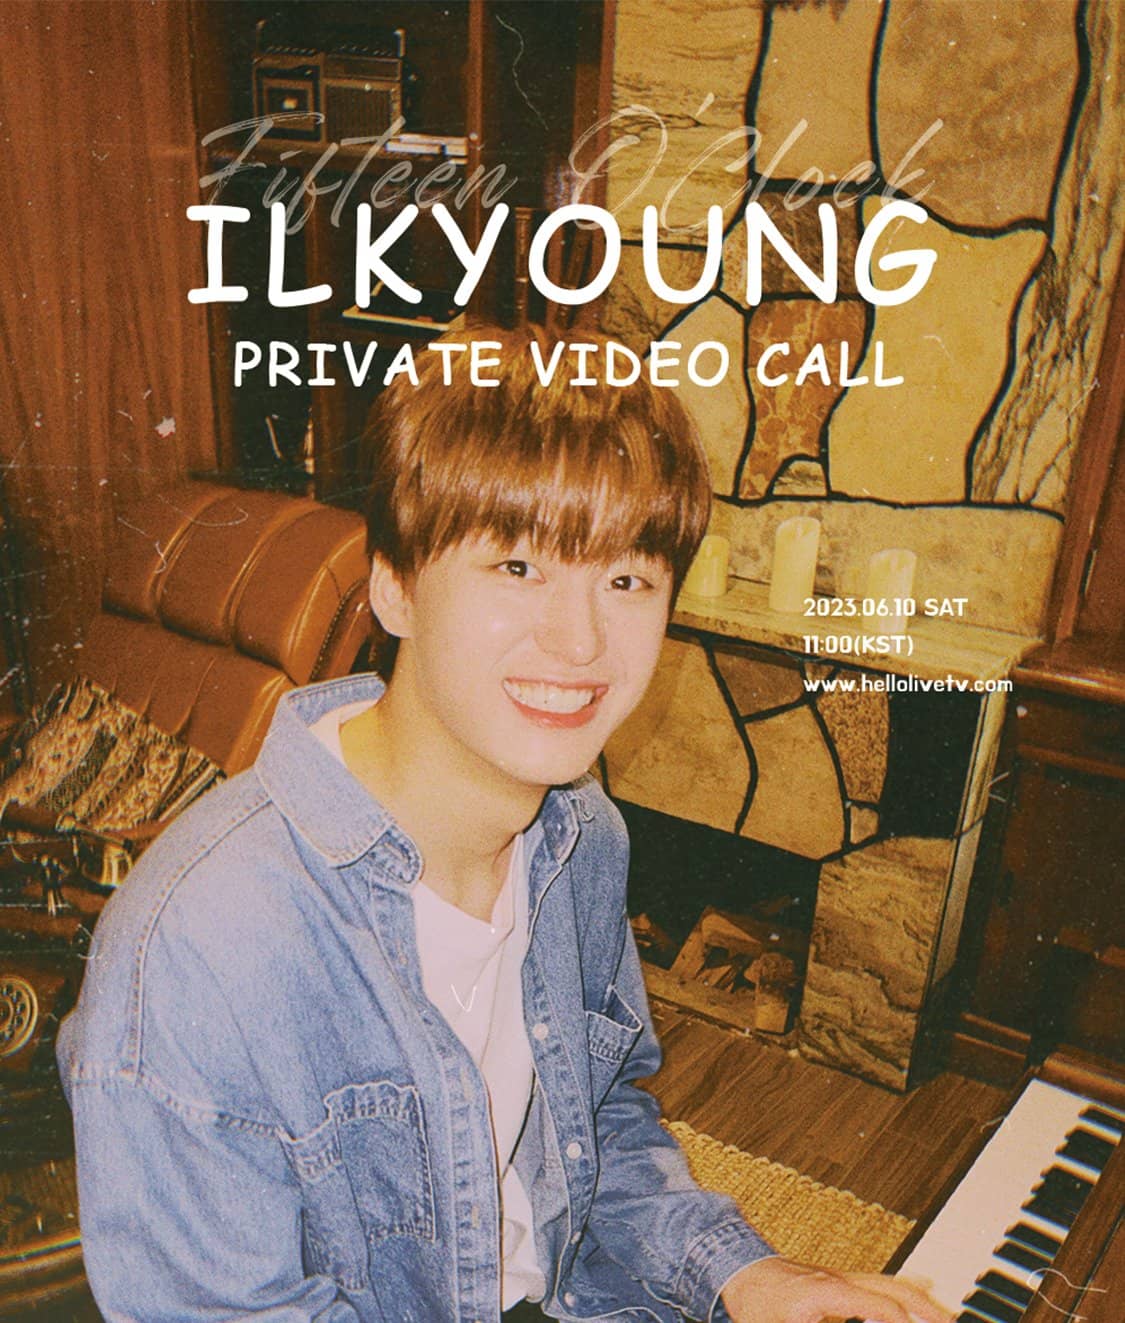 ILKYOUNG 1:1 PRIVATE VIDEO CALL